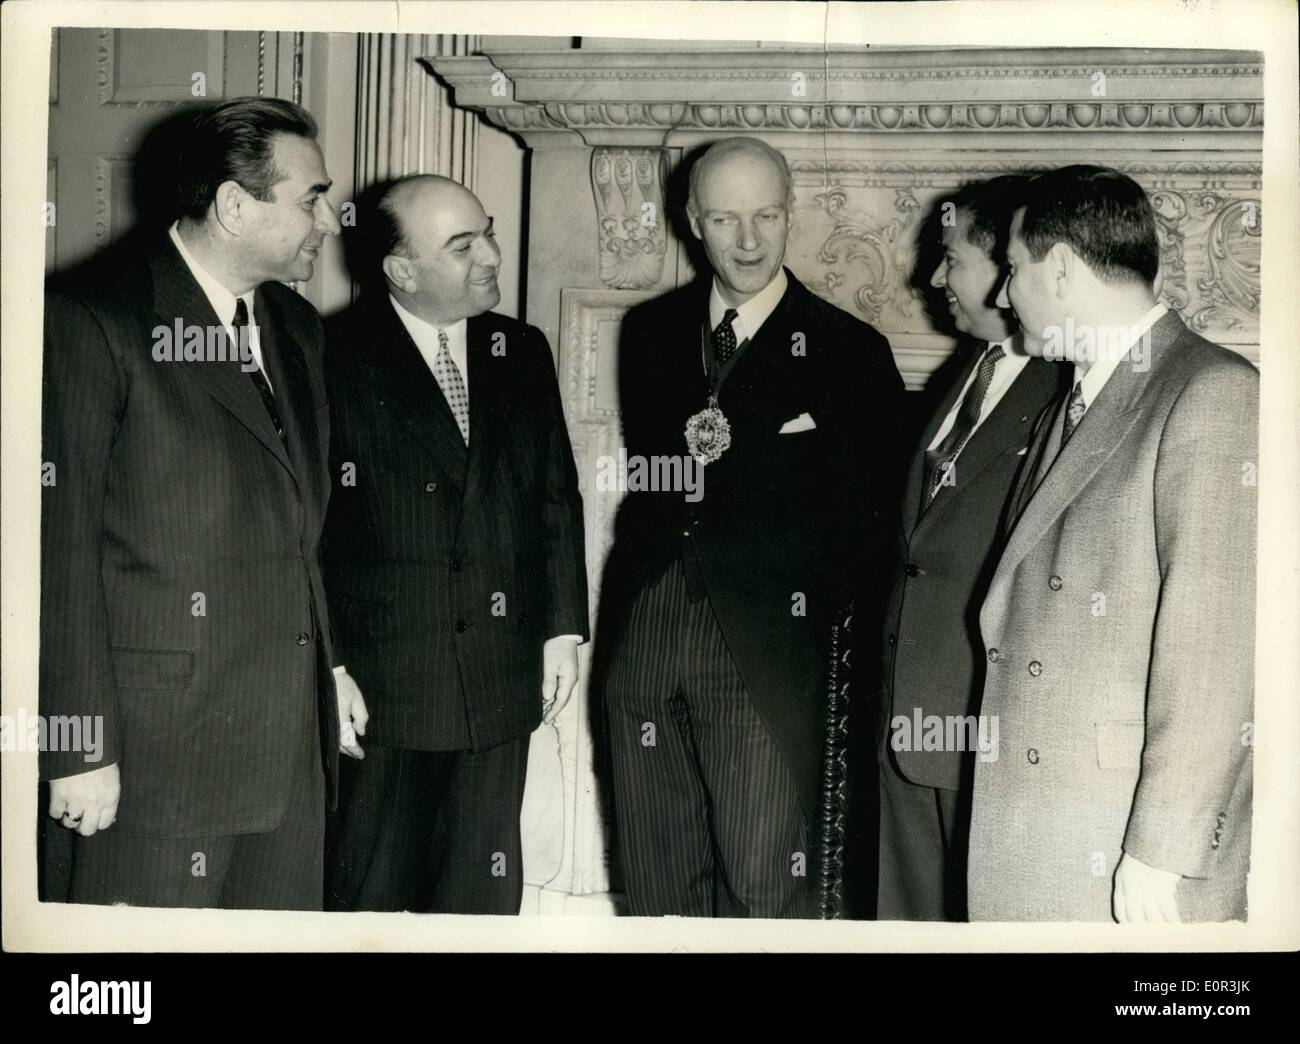 Jan. 01, 1958 - PARTY OF TURKISH VALIS MANSION HOUSE A party of Turkish Valis Provinoial Governors), who are ever here as guests of the Foreign Office, this afternoon went to the Mansion House where they were received by the Lord Mayer of Lenion, Sir Donis Truscott. They are: H,.E Monsieur Niyzai Aki, Vali of the Province of Kekisehir, and HE Monsieur Fahrettin Akkutlu, Vali of the Province of Sivas. Keystone Photo Ahows:- L to R - H.E. Monsieur Hadimli; The Lord Mayor of London, Air Dennis Truscott; H.E. Monsieur Niyazi Aki, and H.E Monsieur Arif Ozgen. Stock Photo